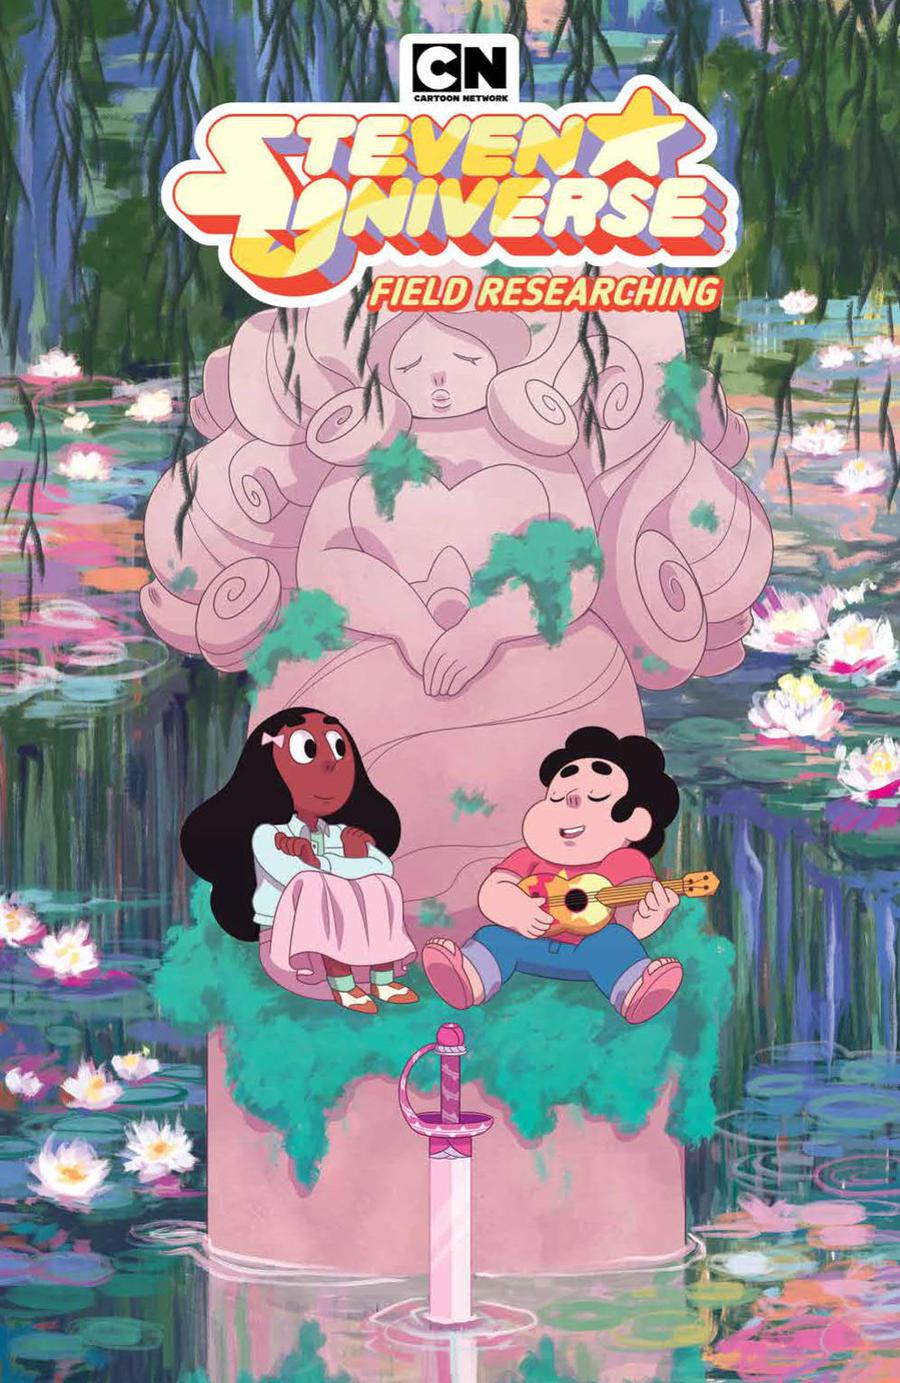 Steven Universe Ongoing Vol 3 Field Researching TP